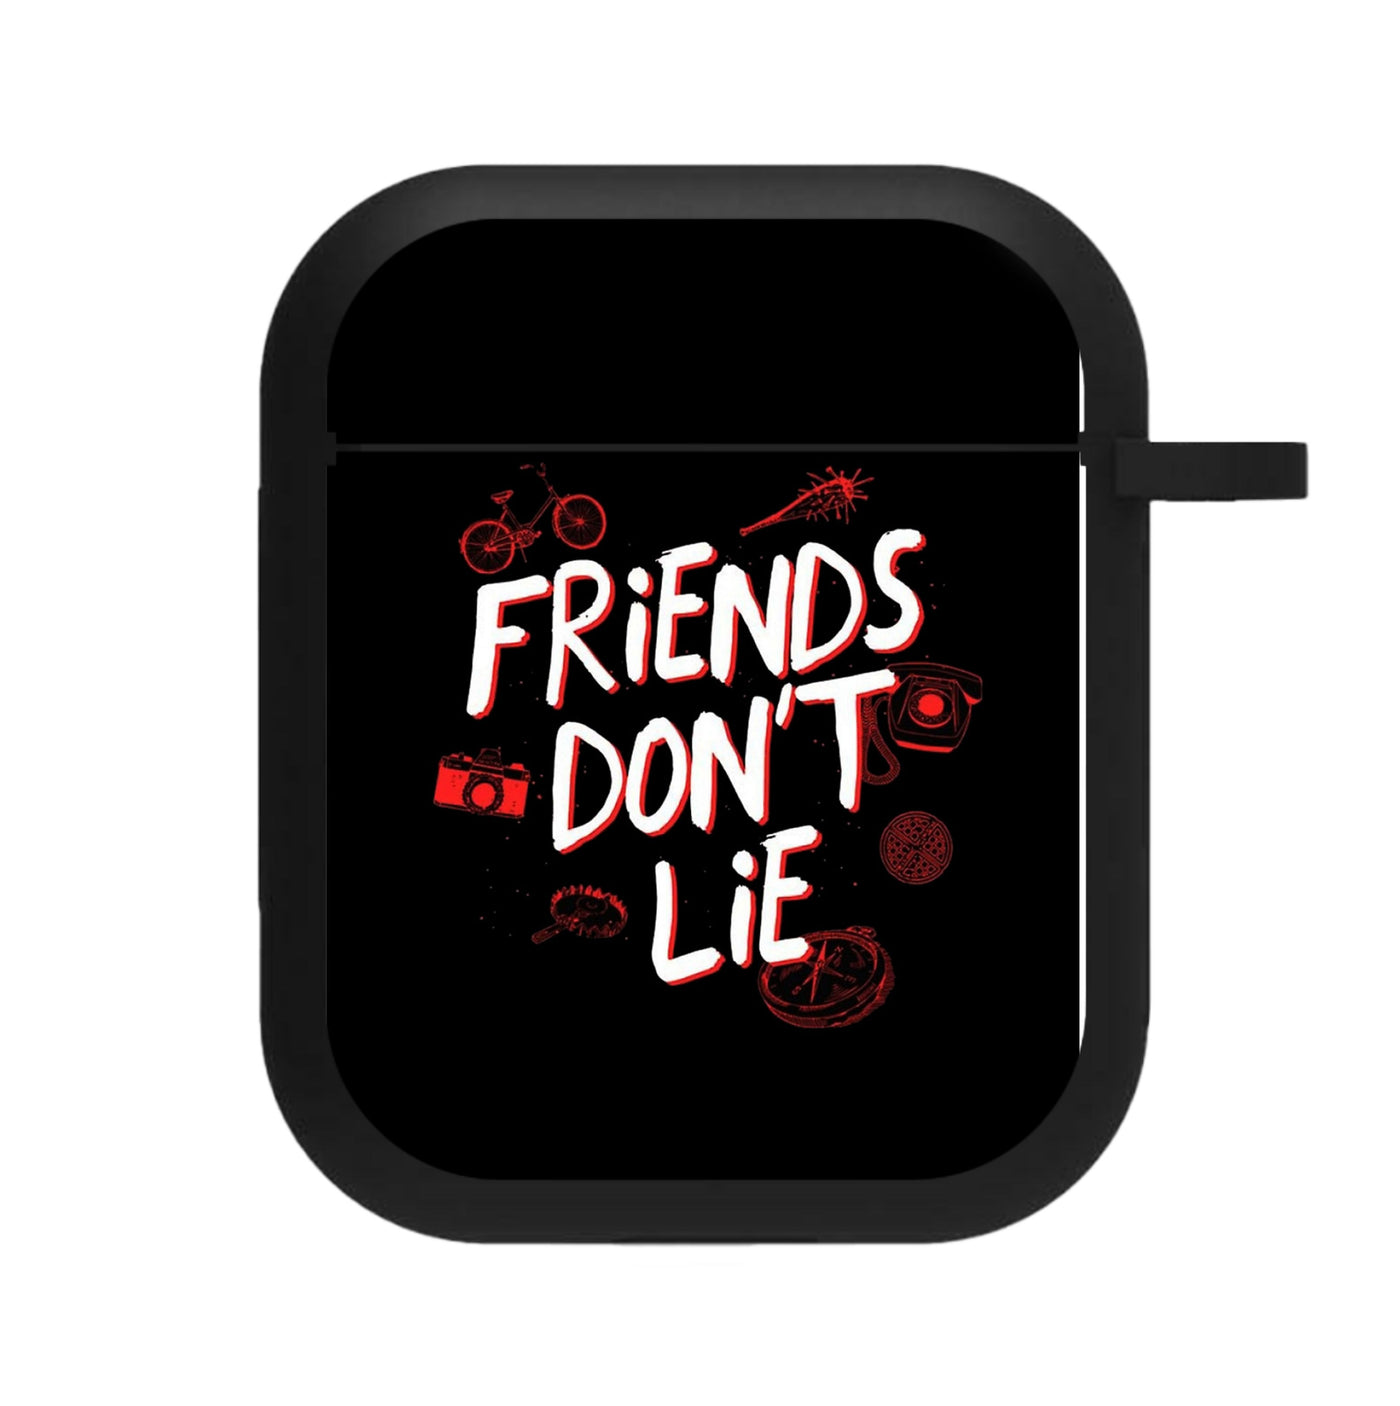 Friends Don't Lie - Stranger Things AirPods Case